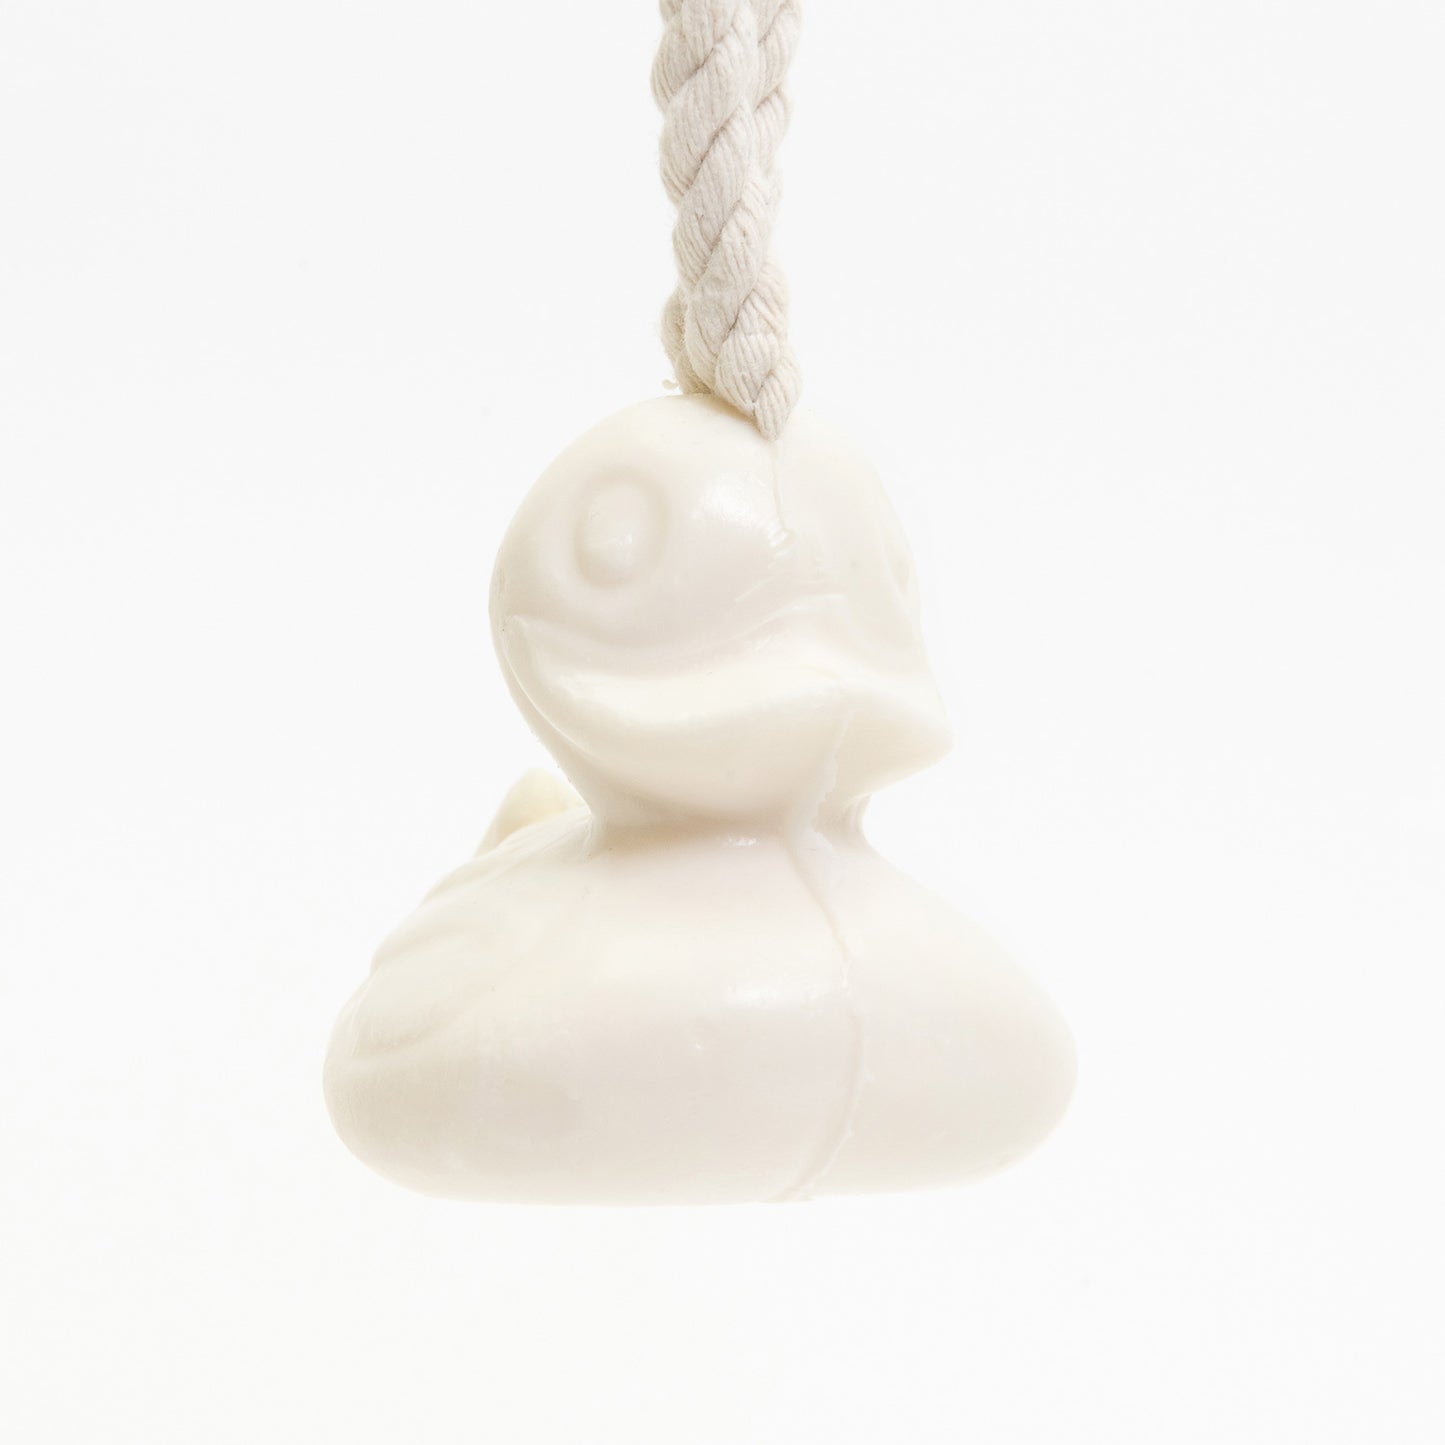 A white duck-shaped soap on a rope, pictured on a white background.